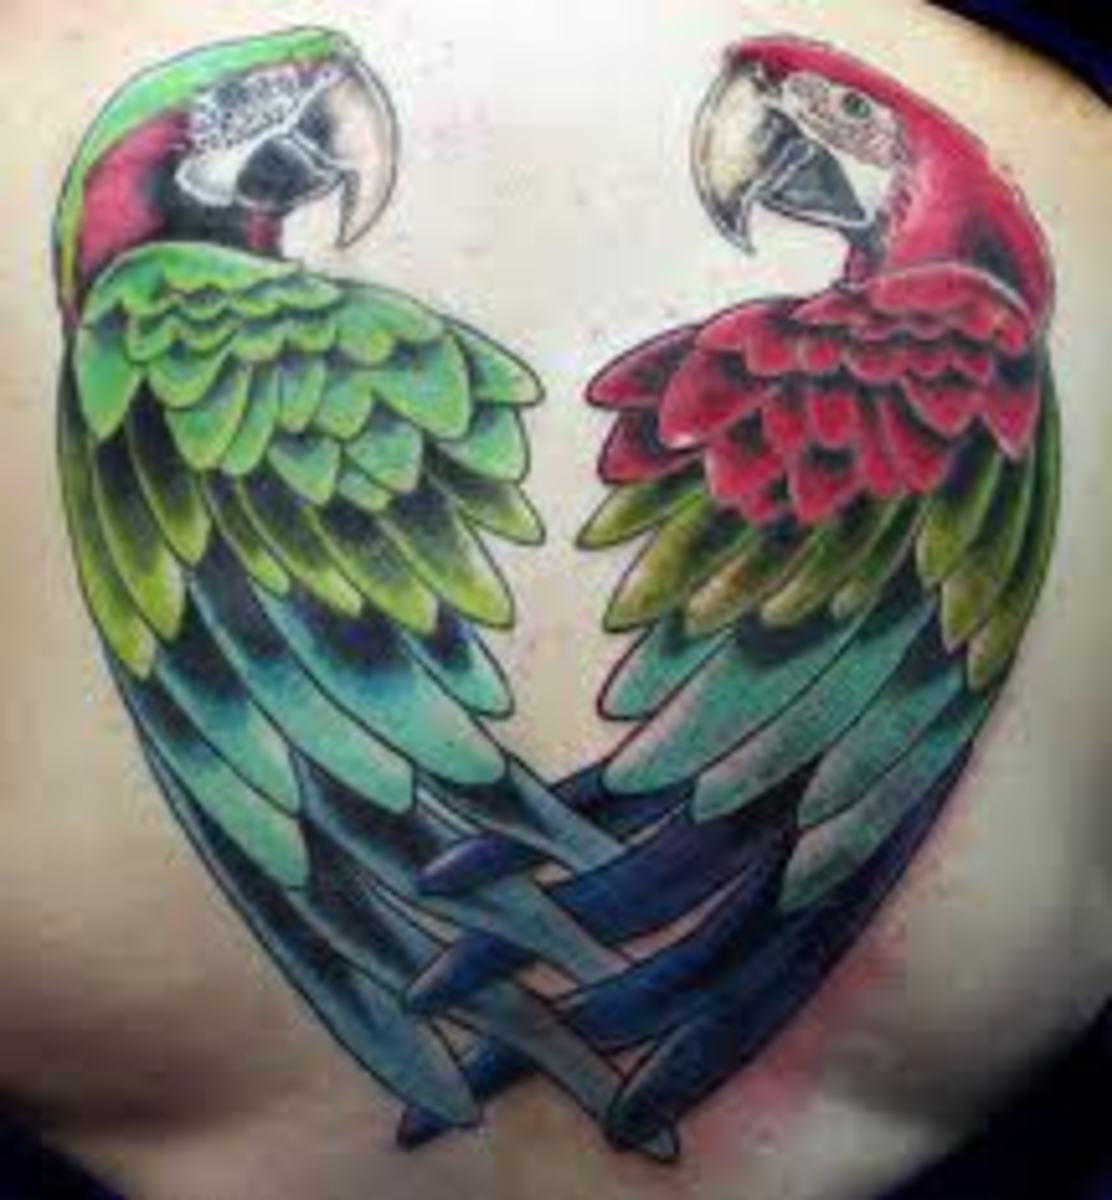 Parrot Tattoos And Designs-Parrot Tattoo Meanings And Ideas - HubPages